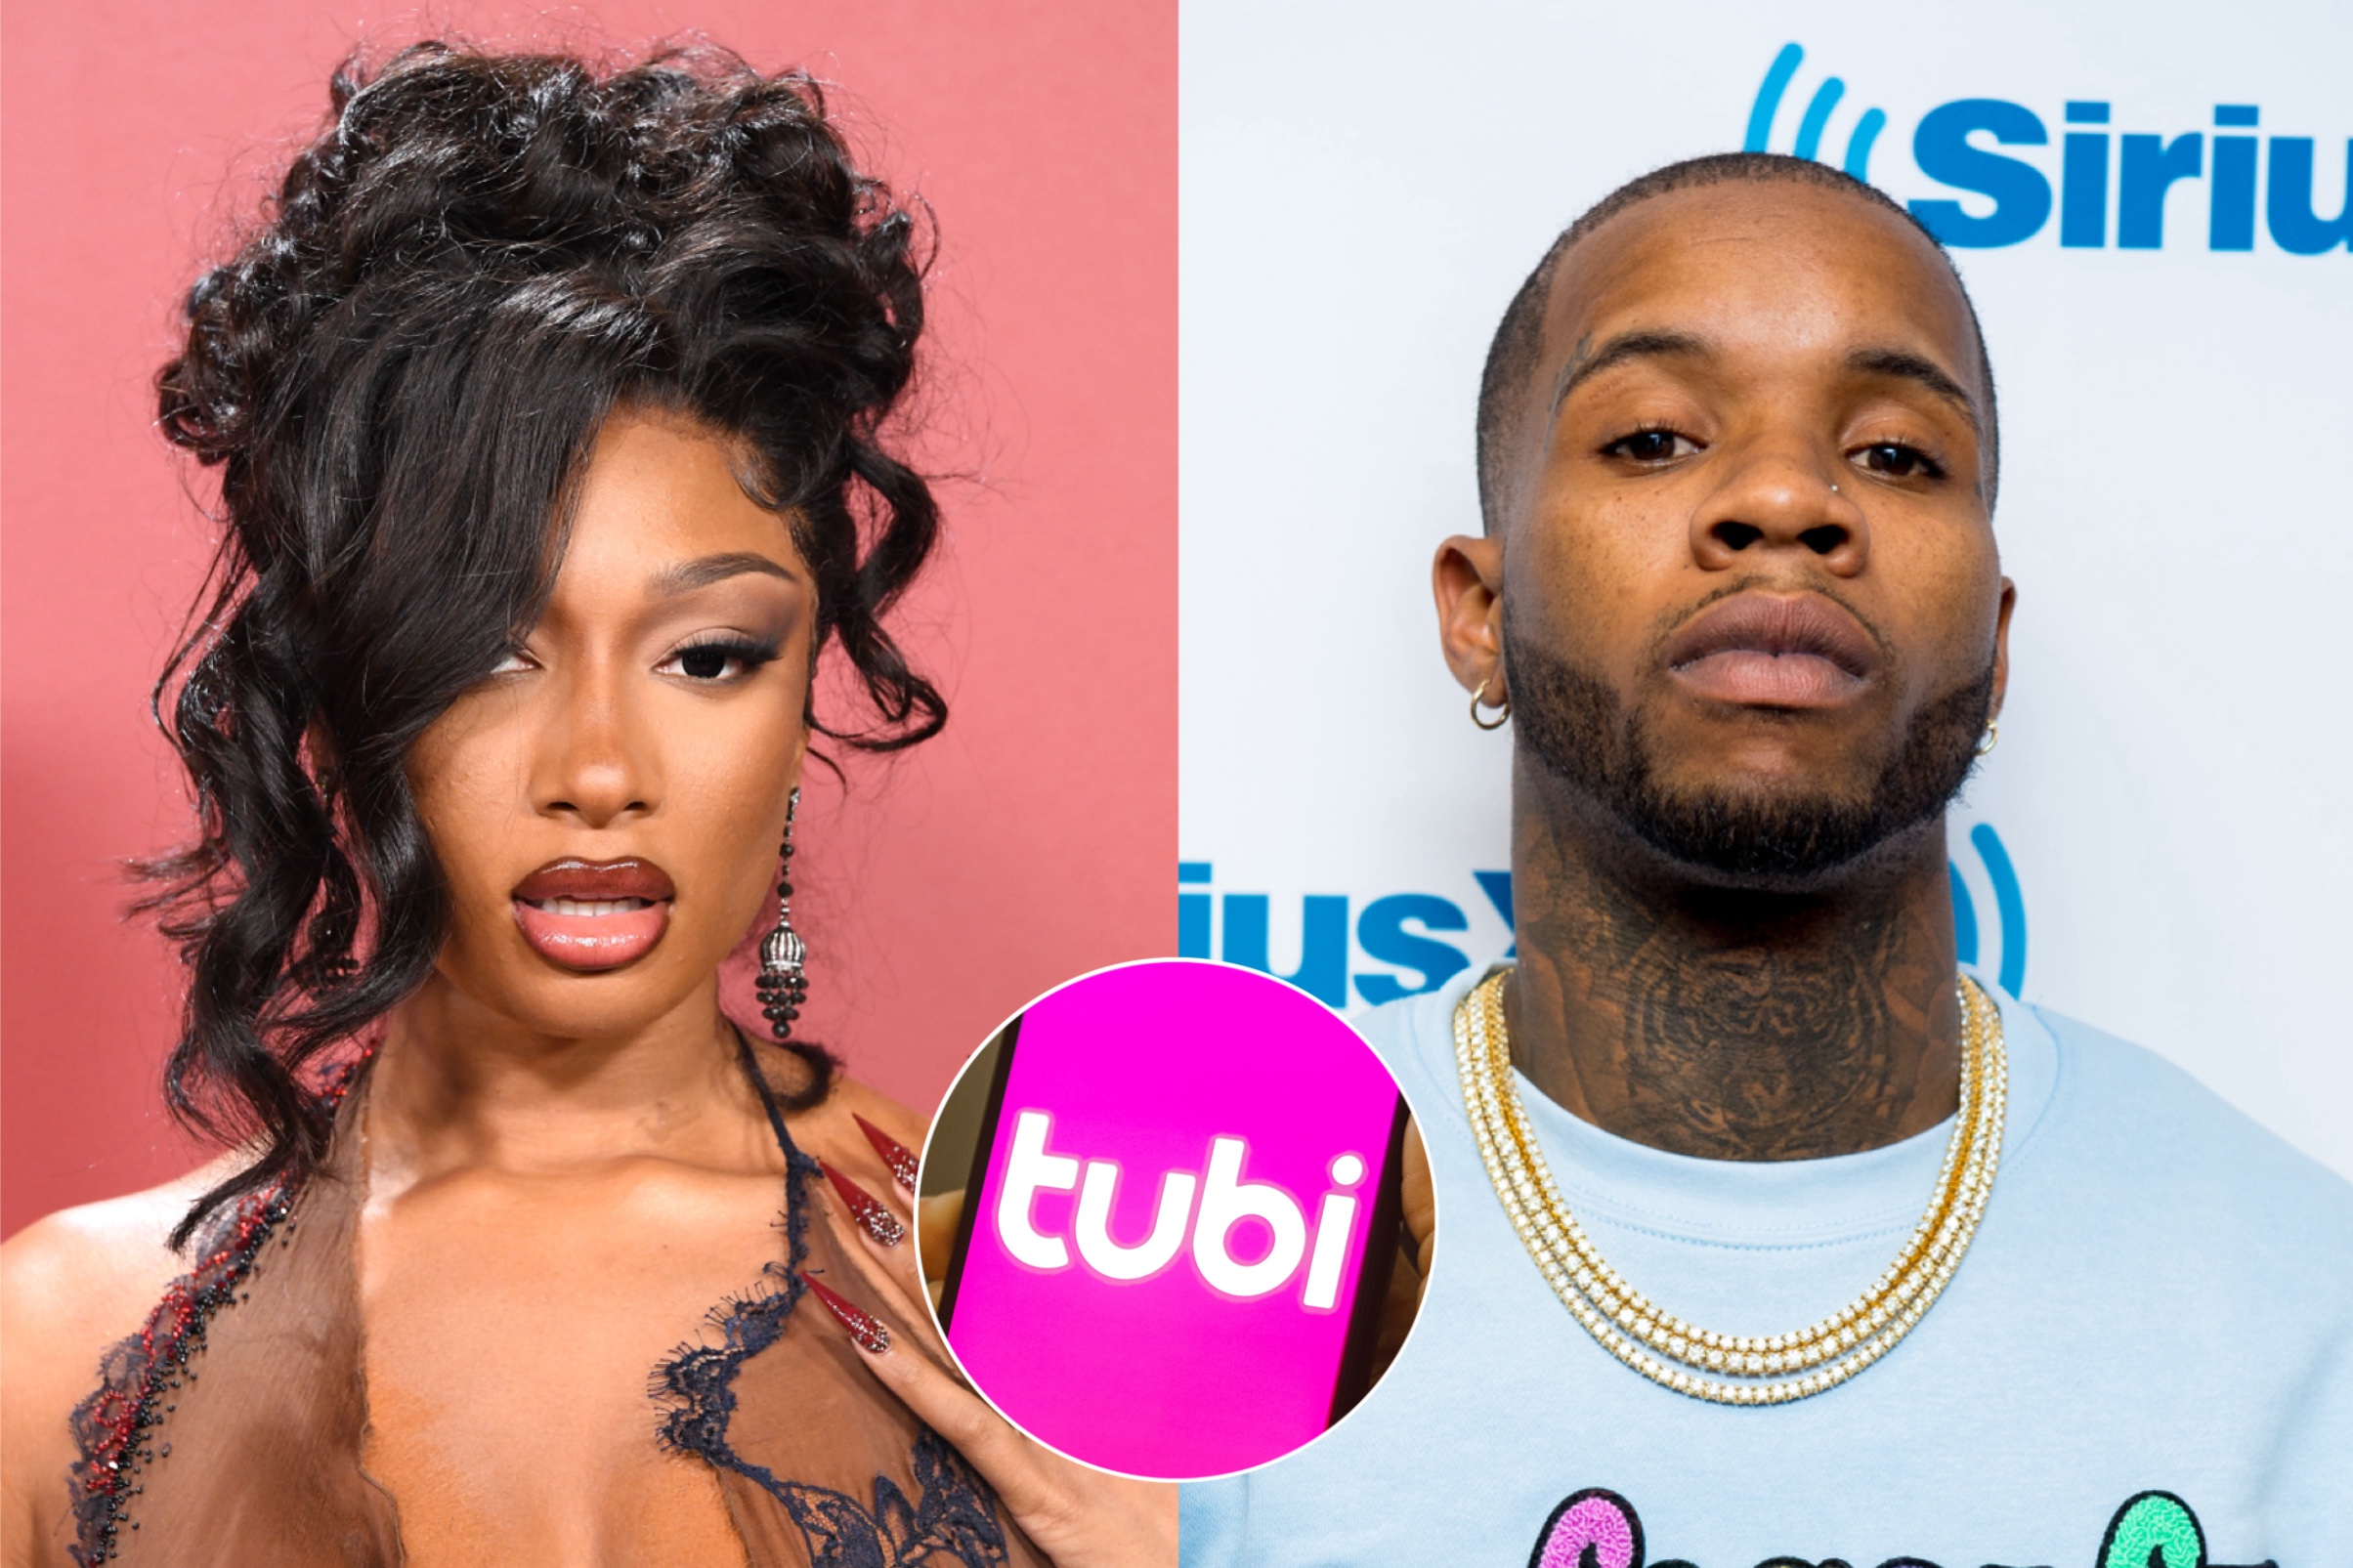 Tubi Faces Criticism For Movie About Tory Lanez And Megan Thee Stallion Shooting #ToryLanez